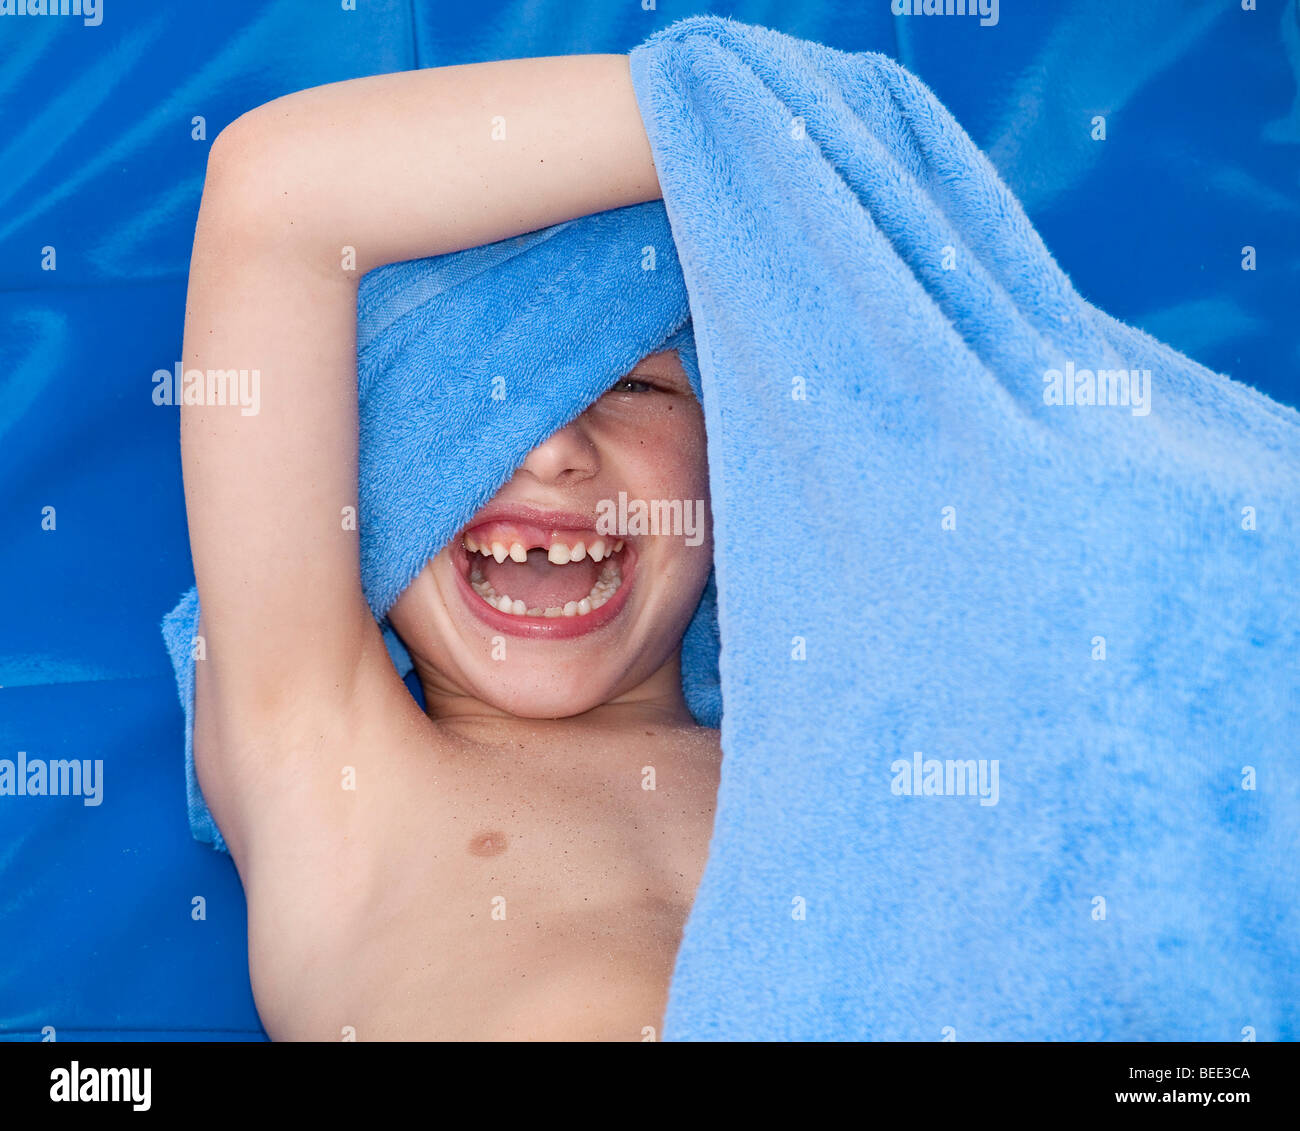 6-year-old boy with a tooth gap hiding behind a towl laughing Stock Photo